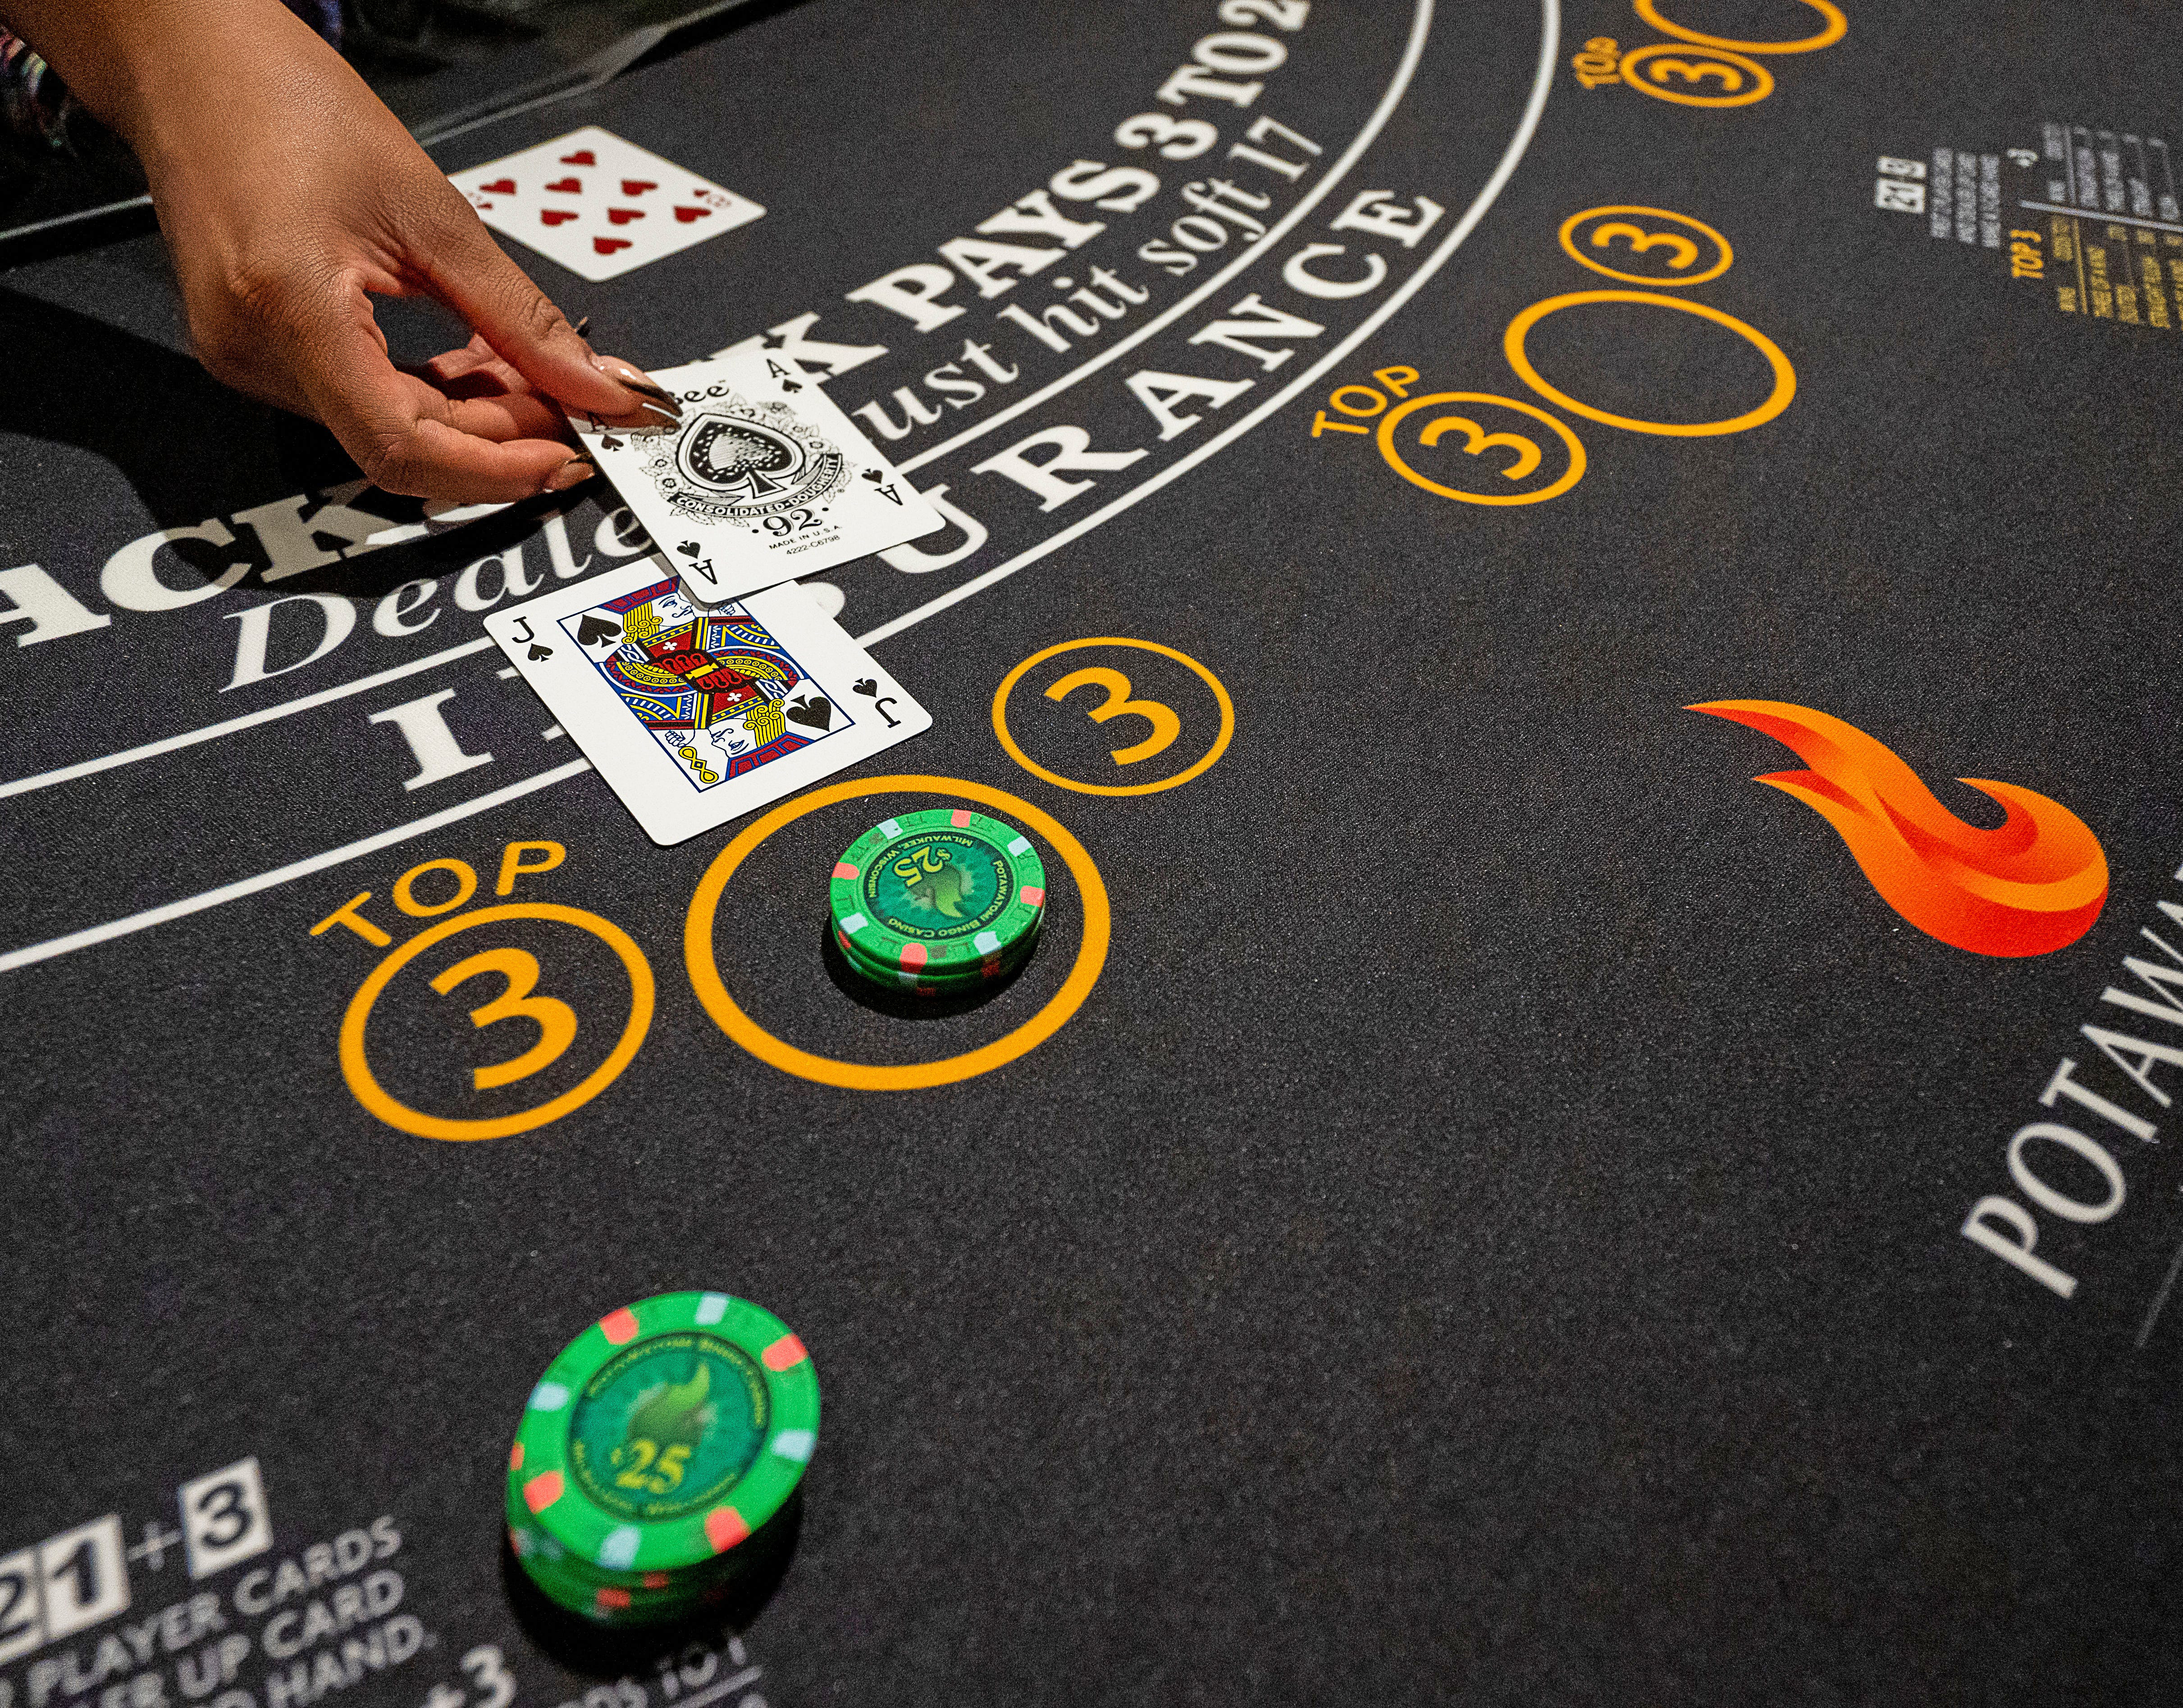 How To Bet - Evolution and BetRivers Partner to Launch Live Casino Games in Delaware